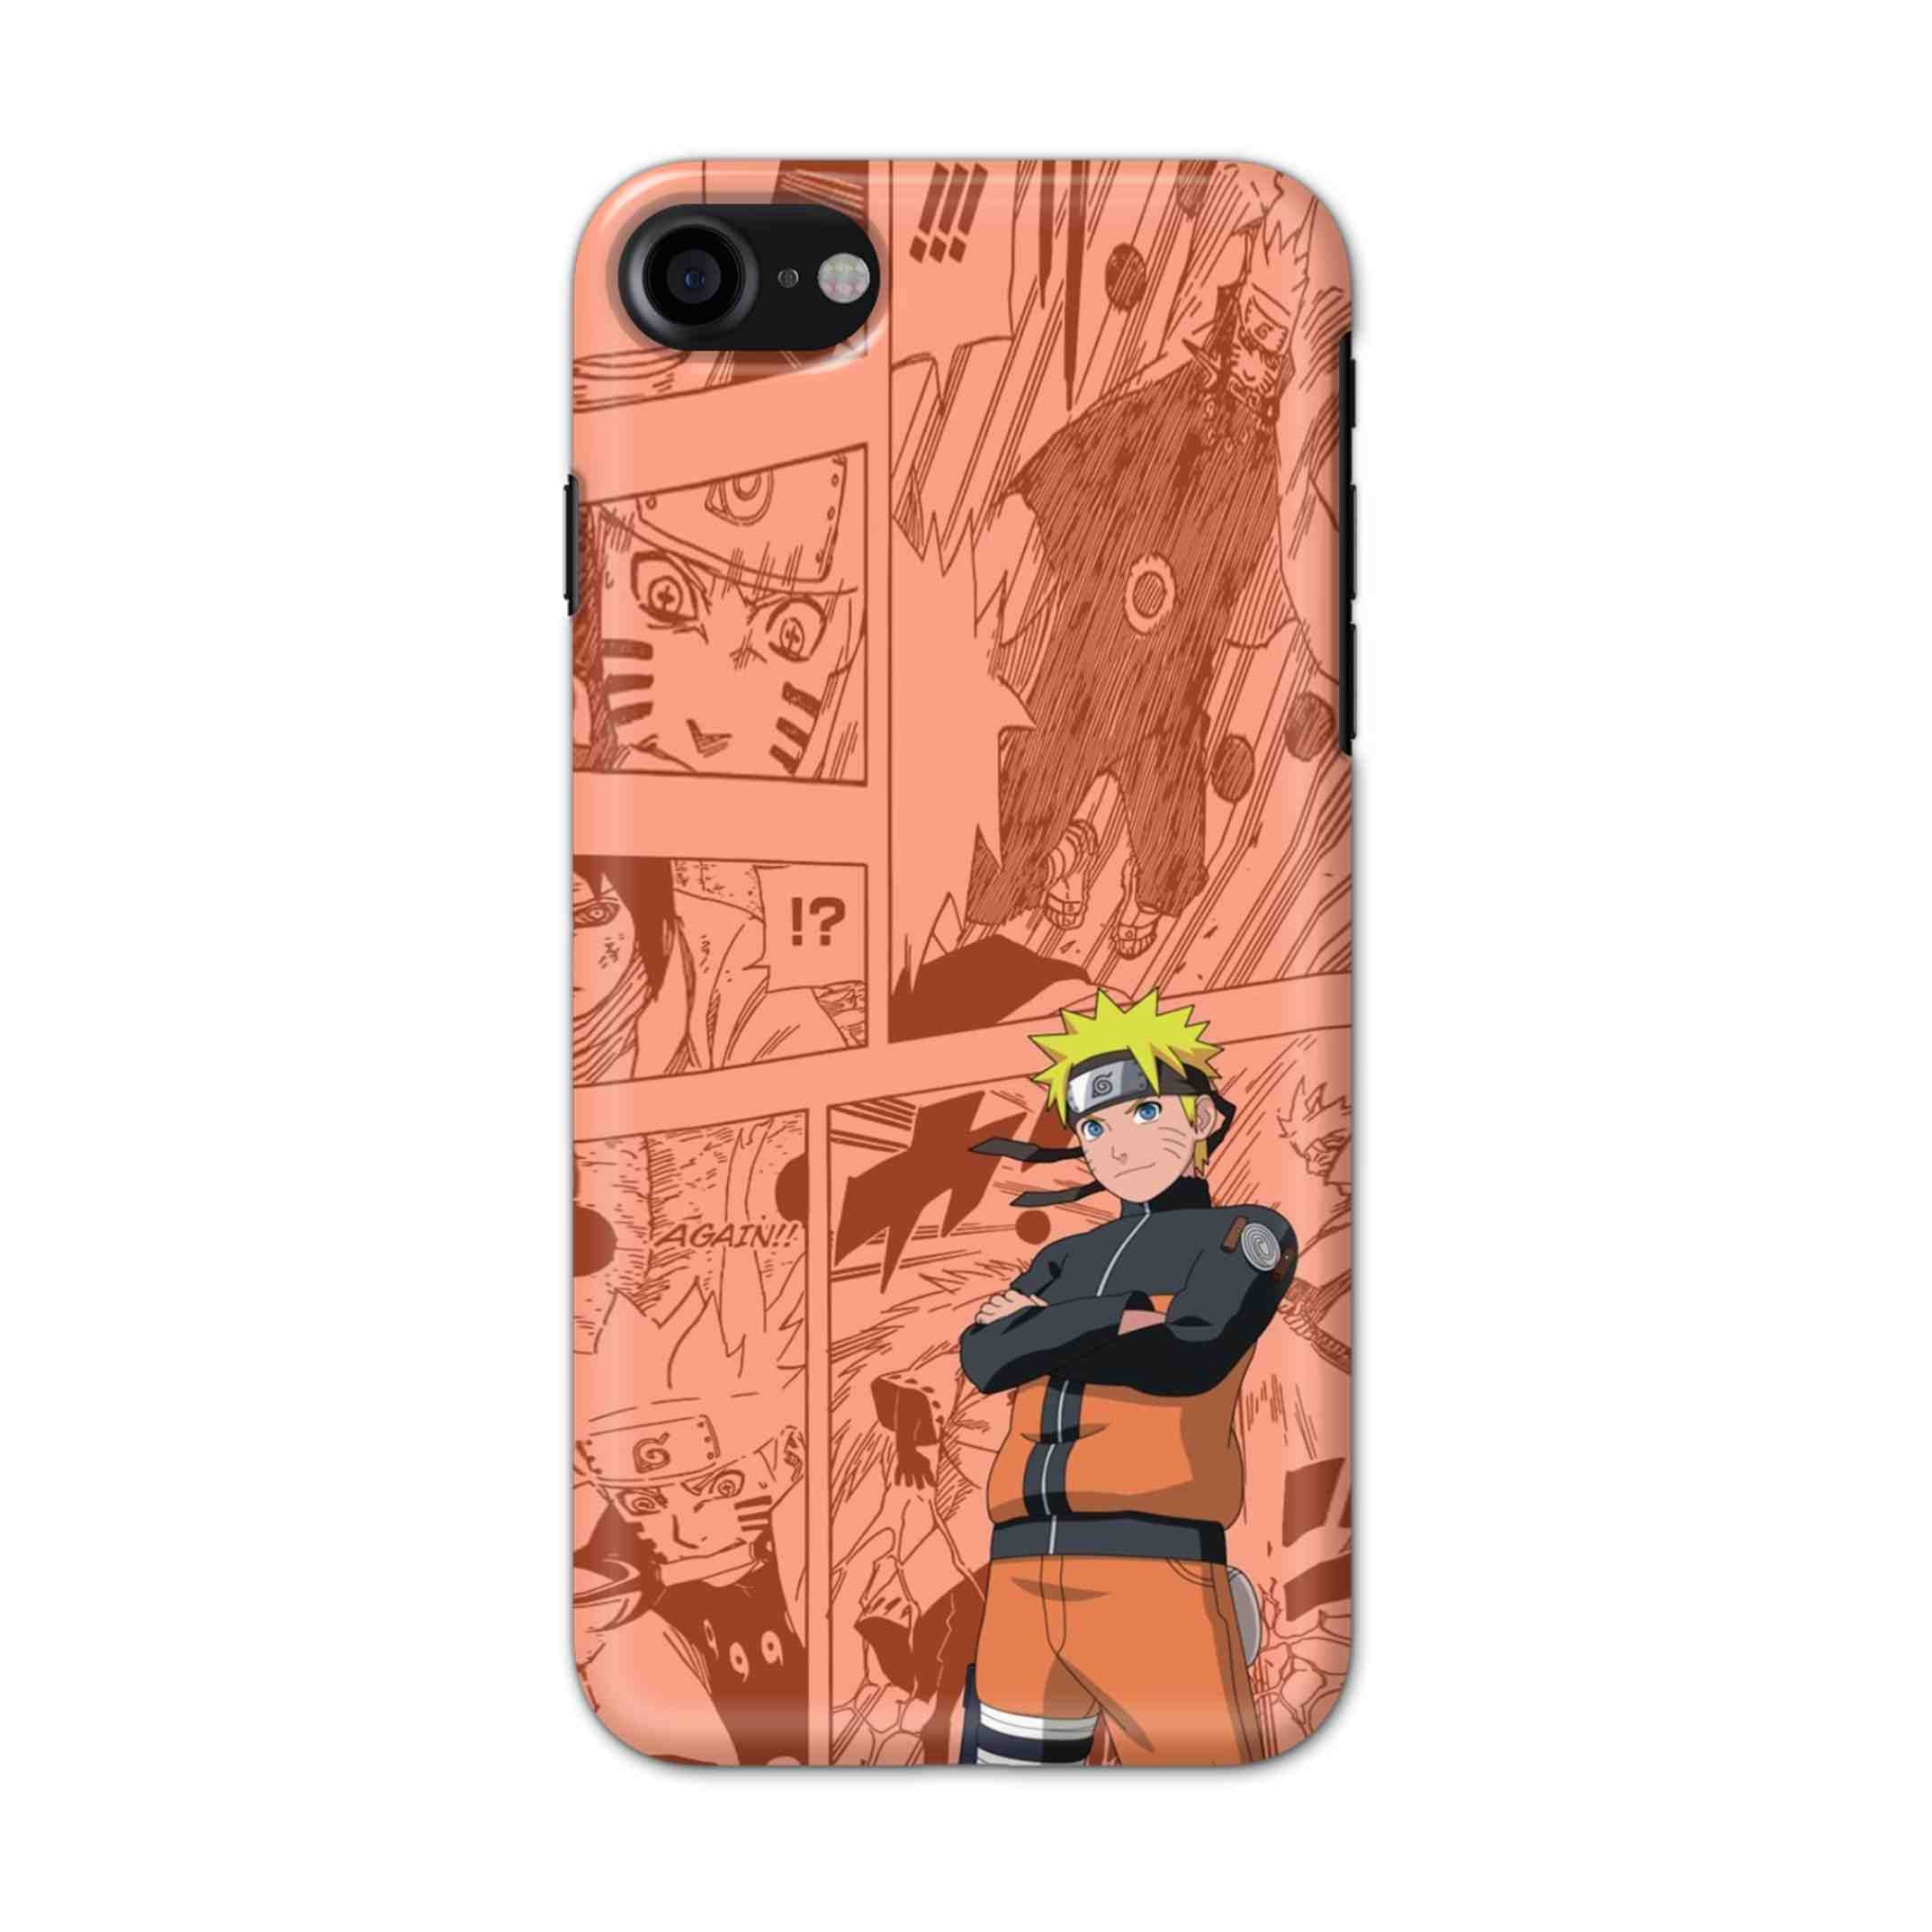 Buy Naruto Hard Back Mobile Phone Case/Cover For iPhone 7 / 8 Online